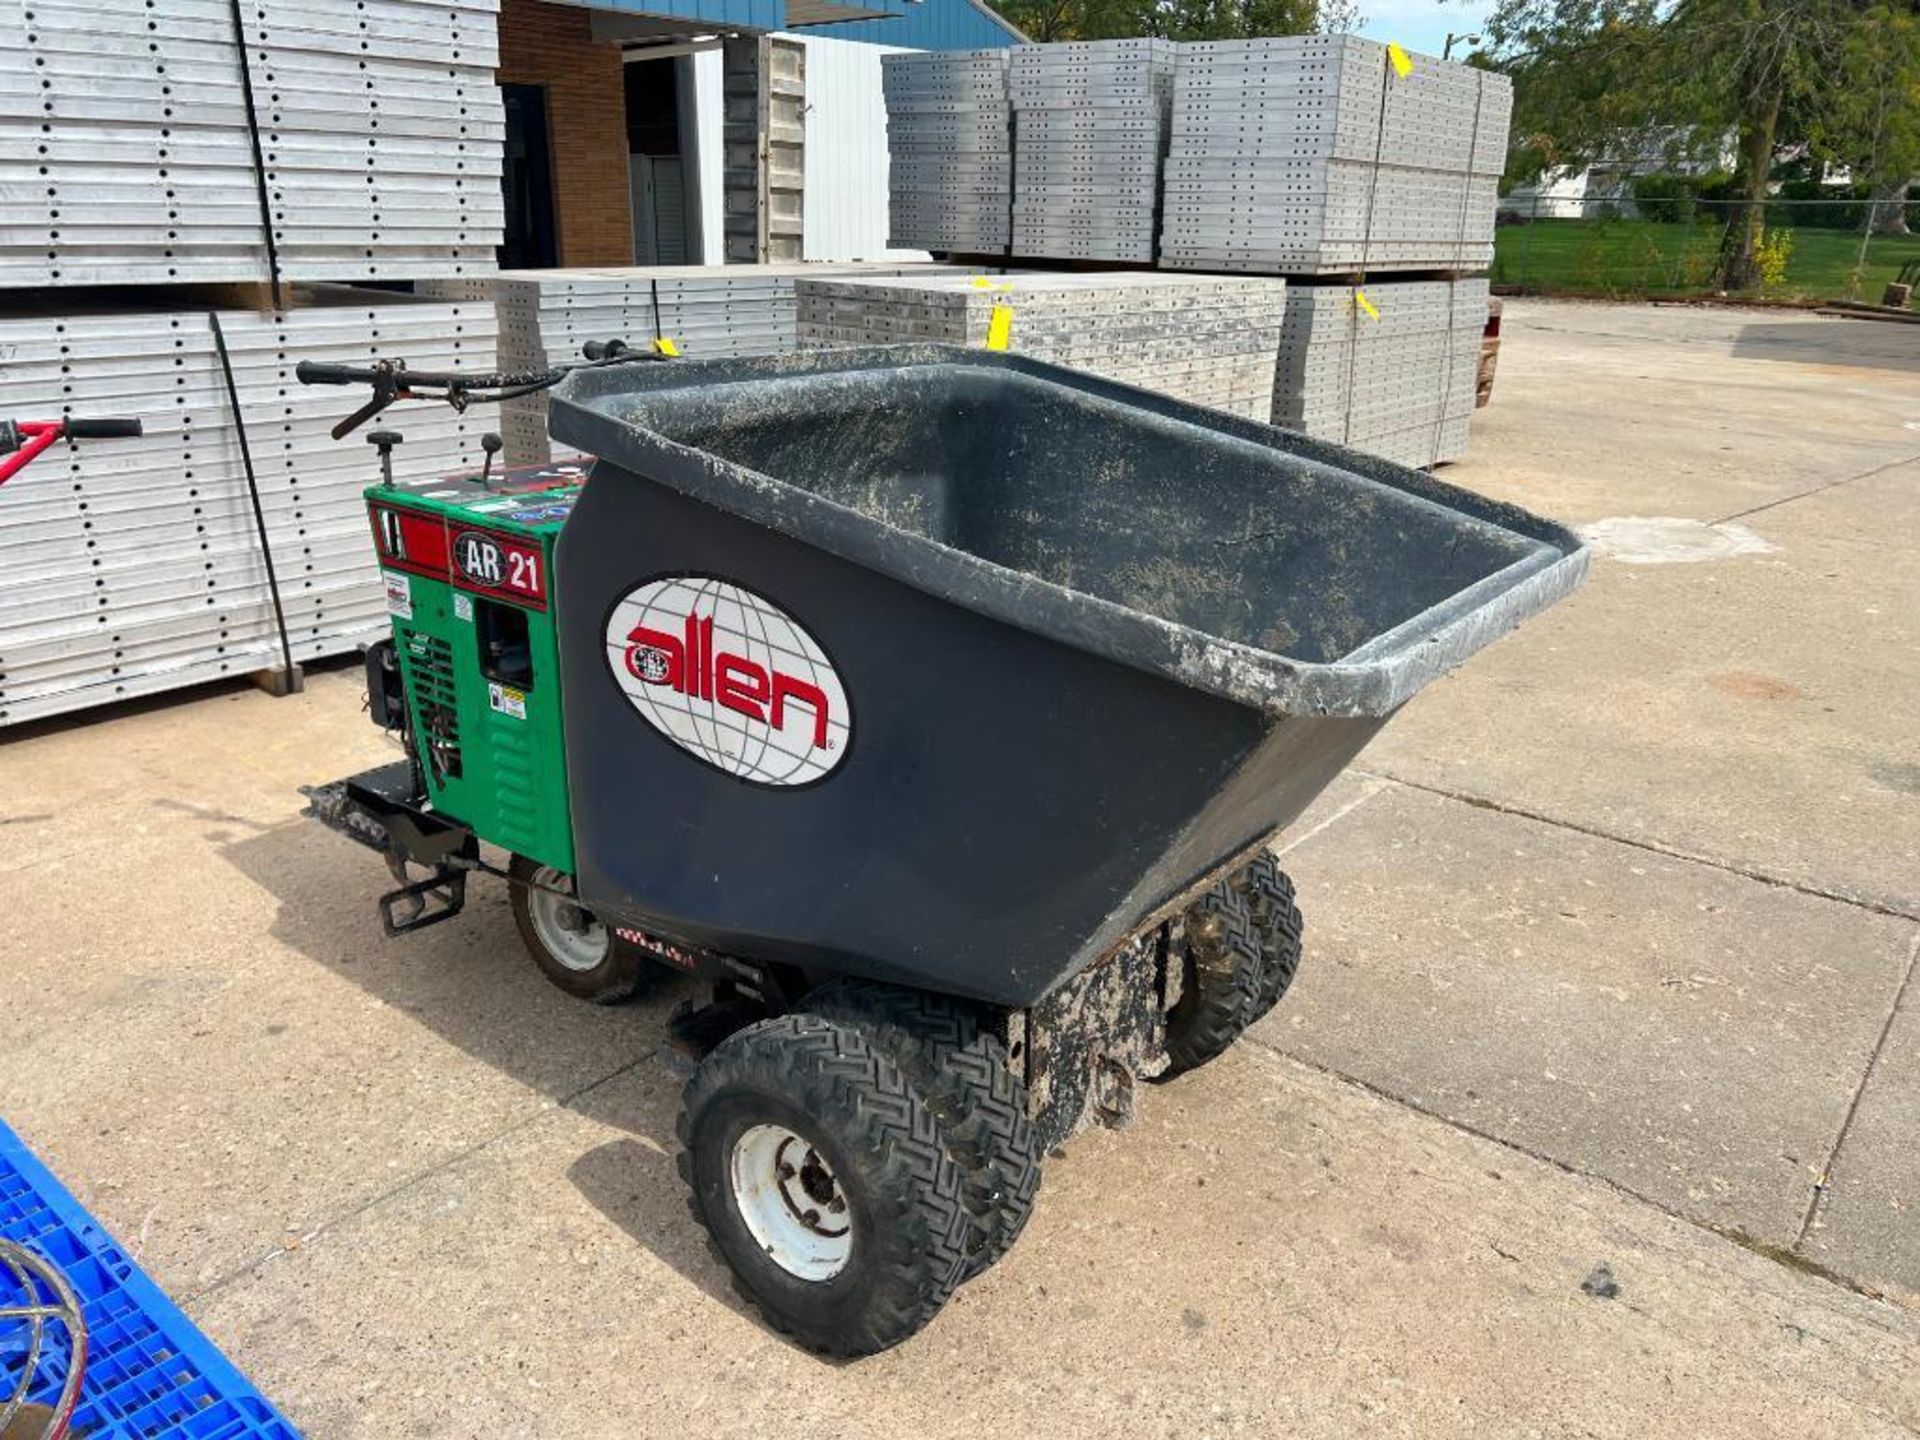 Allen AR21 Concrete Buggy, Serial #A210915005, Max Loading Capacity 3200#, Engine 20 HP, Serial #A21 - Image 3 of 9